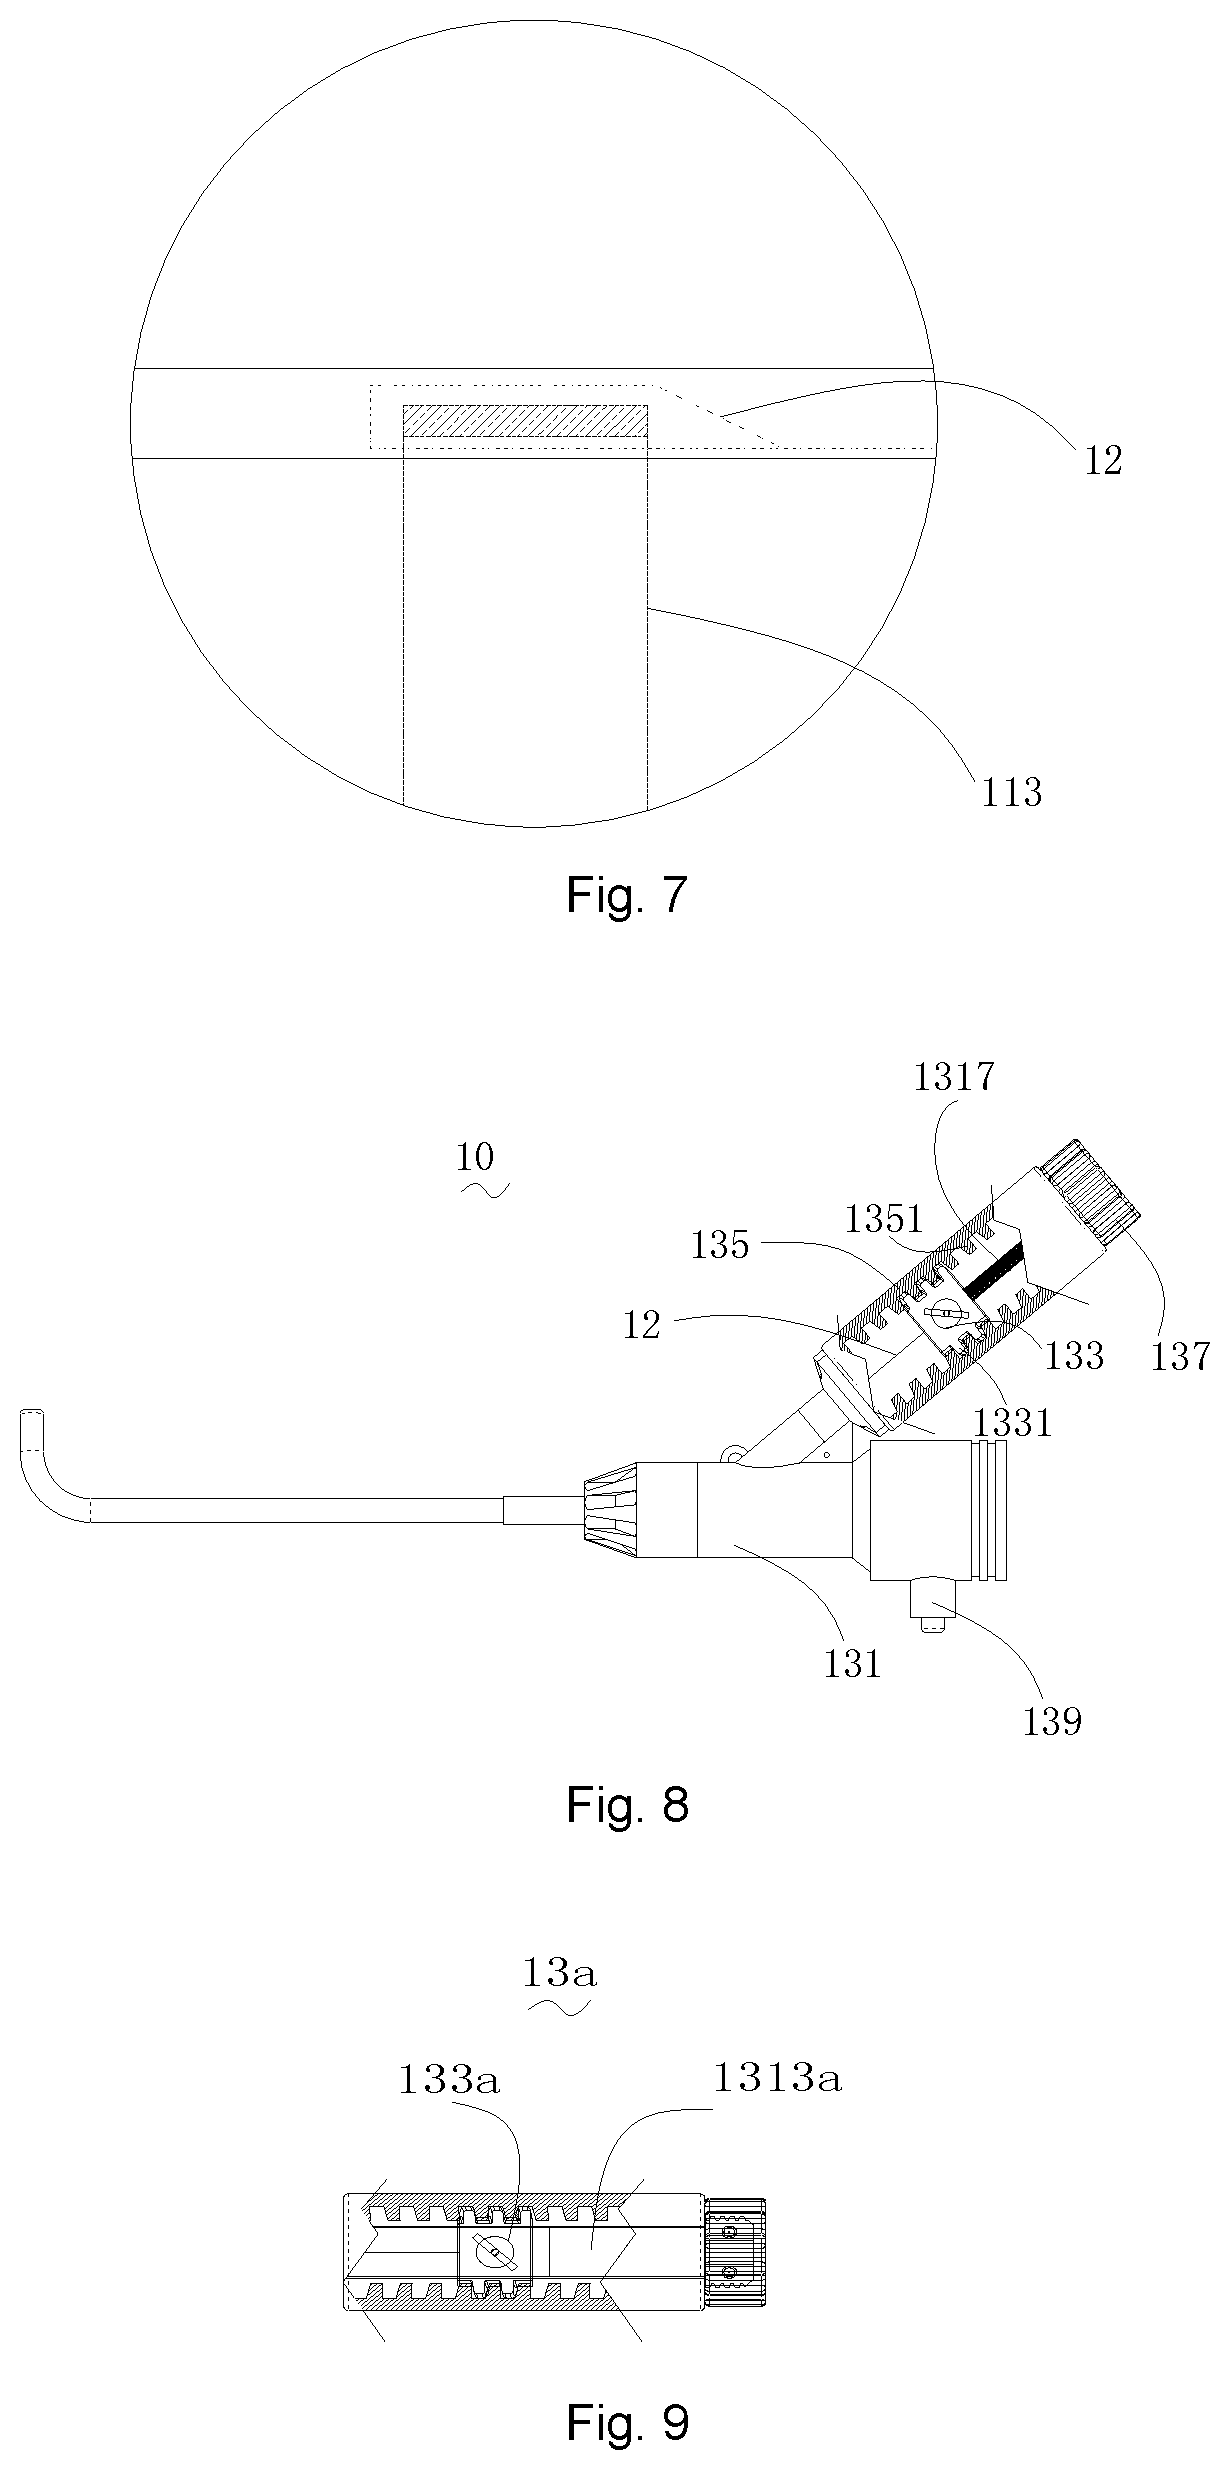 Steerable sheath tube and method for occluding atrial septal defect